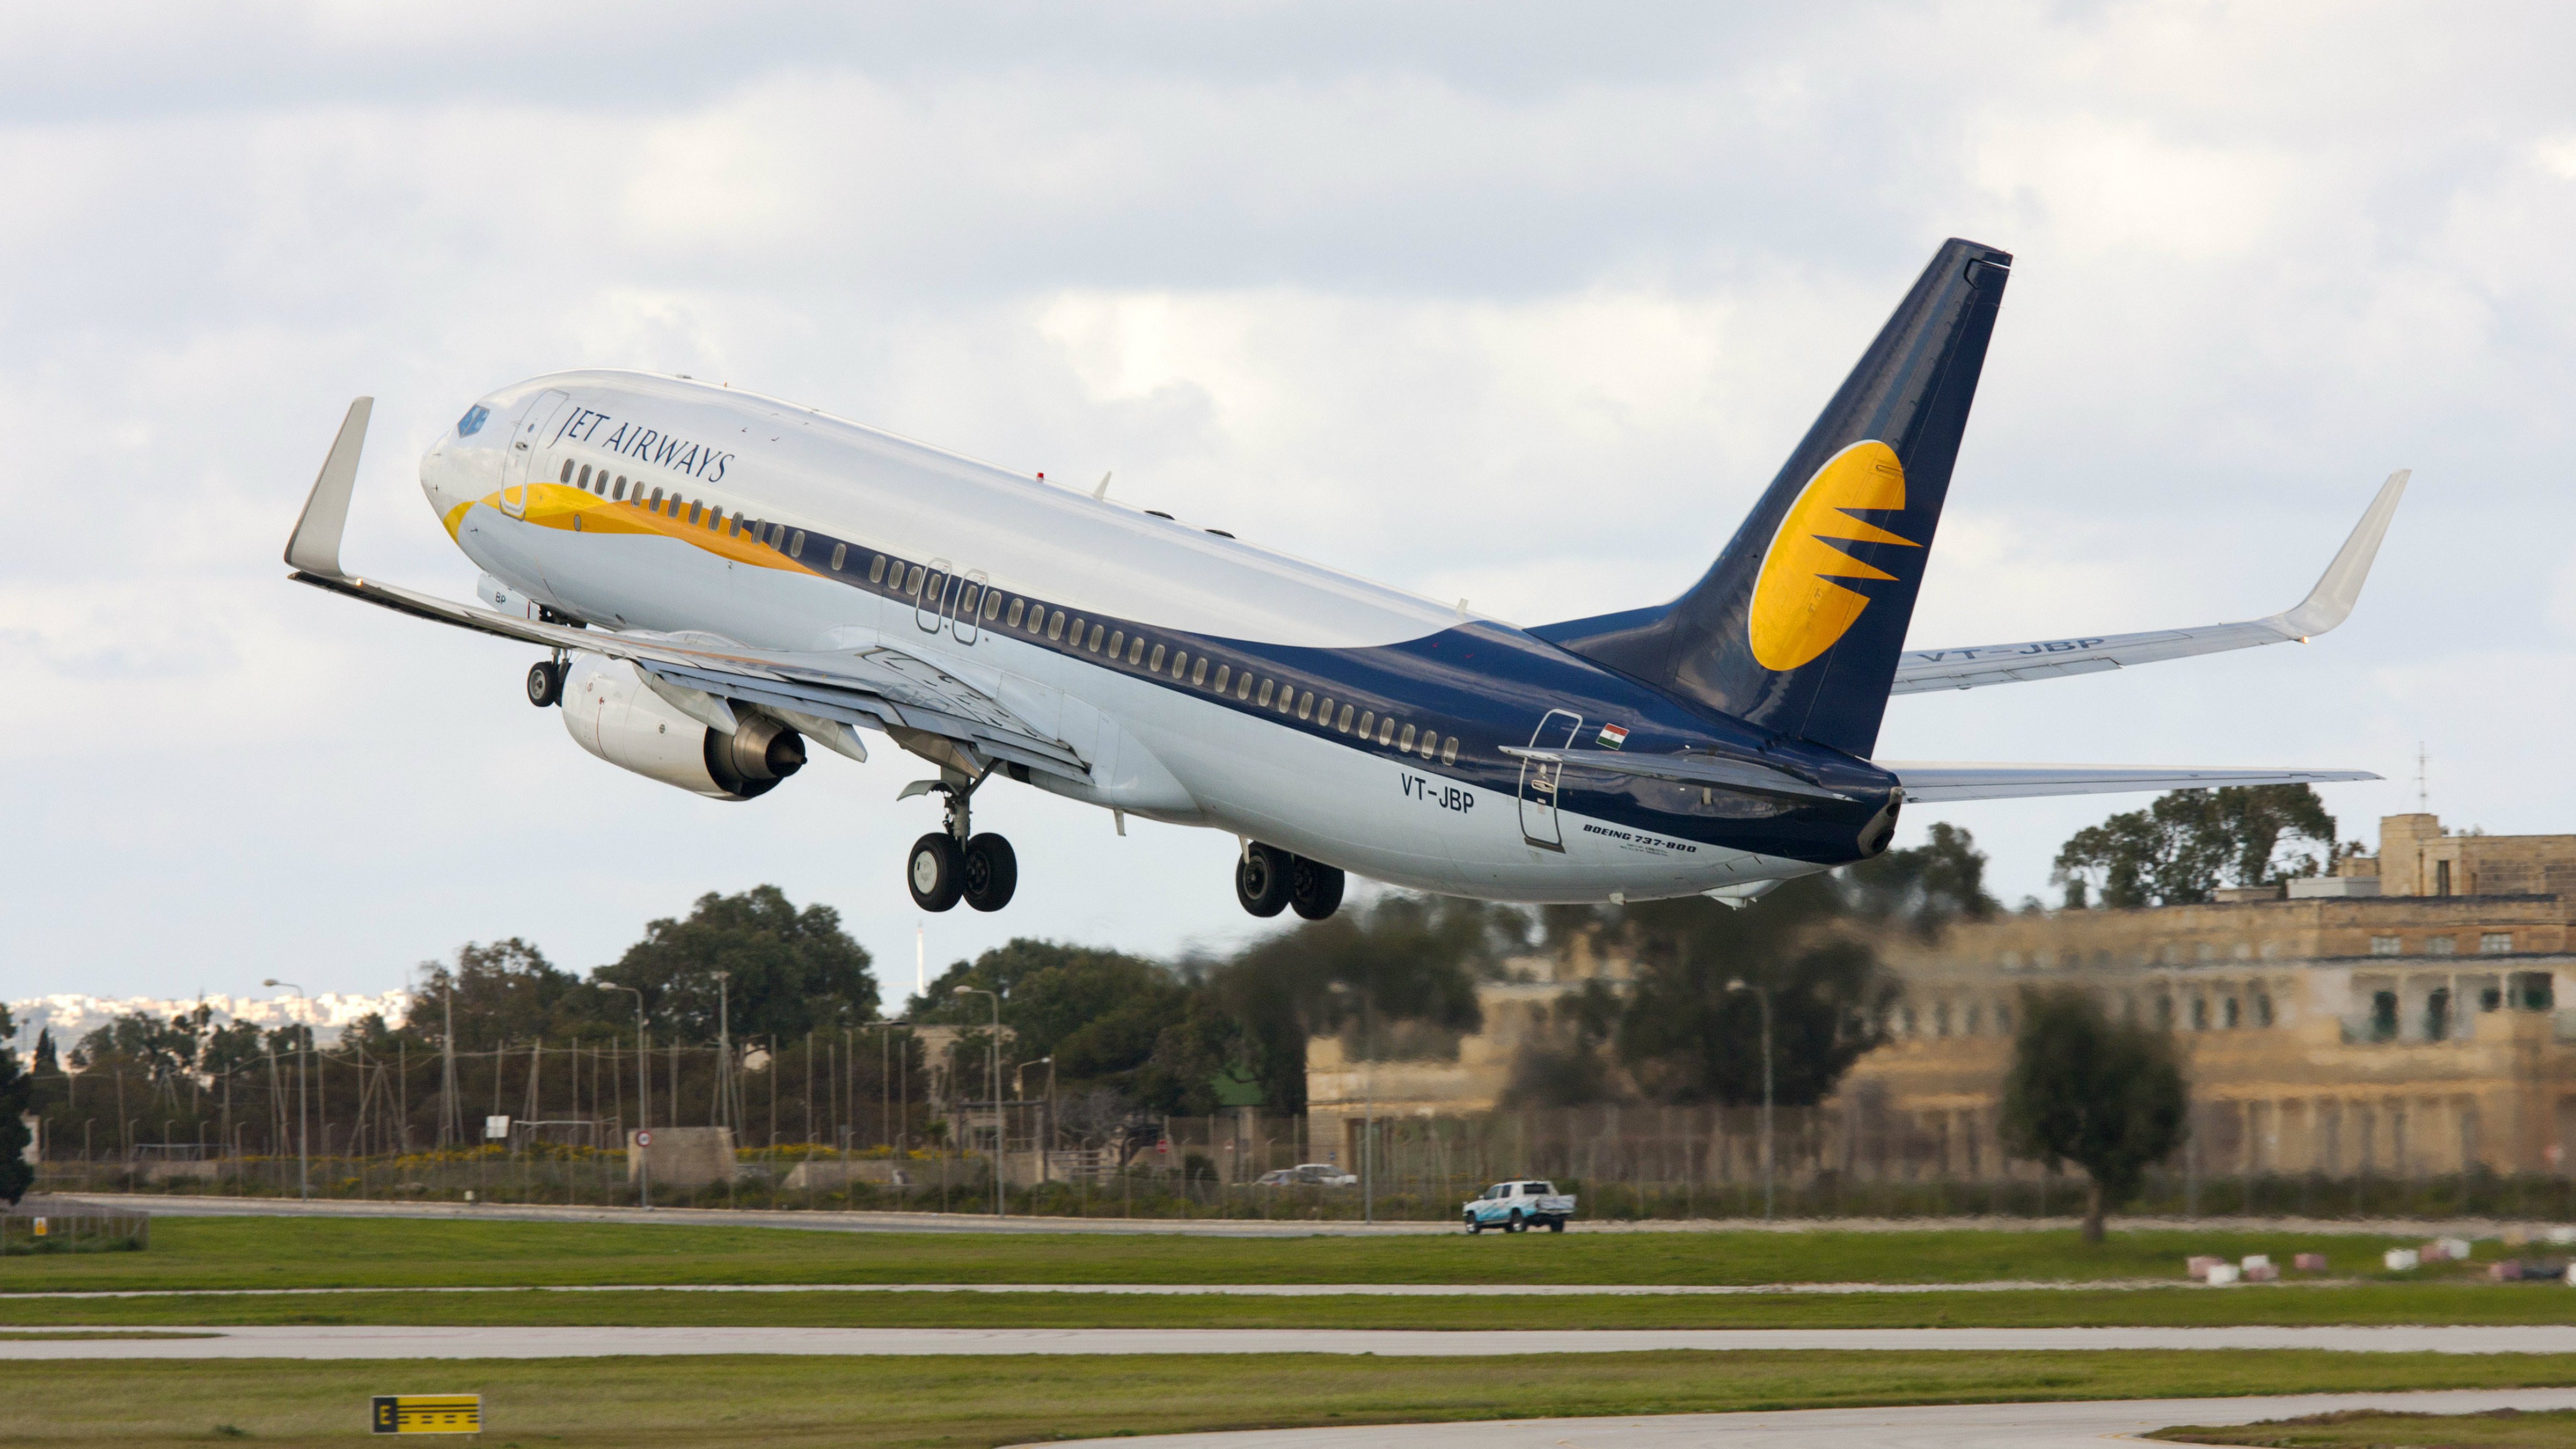 Jet Airways founder Naresh Goyal has said he is willing to invest up to Rs 700 crore but has set the condition that his stake in the airline should not fall below 25 per cent.